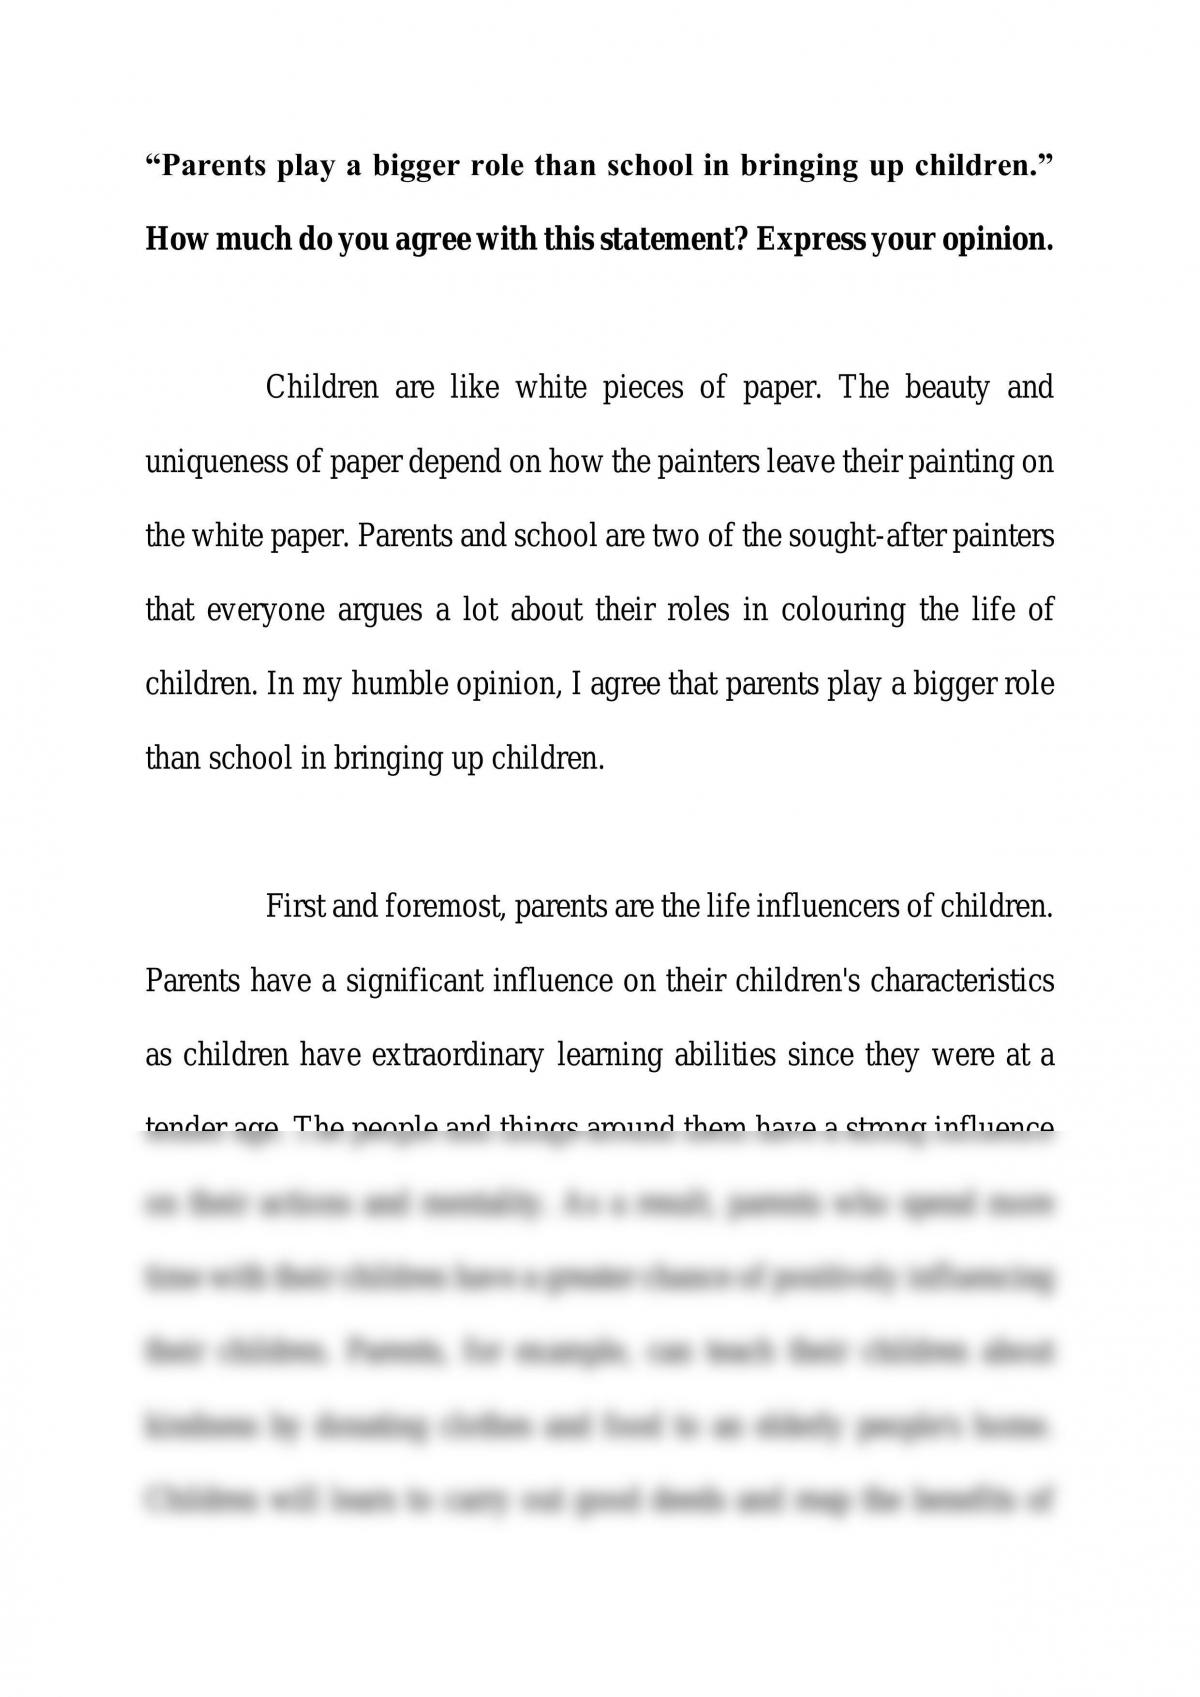 essay about bringing up a child